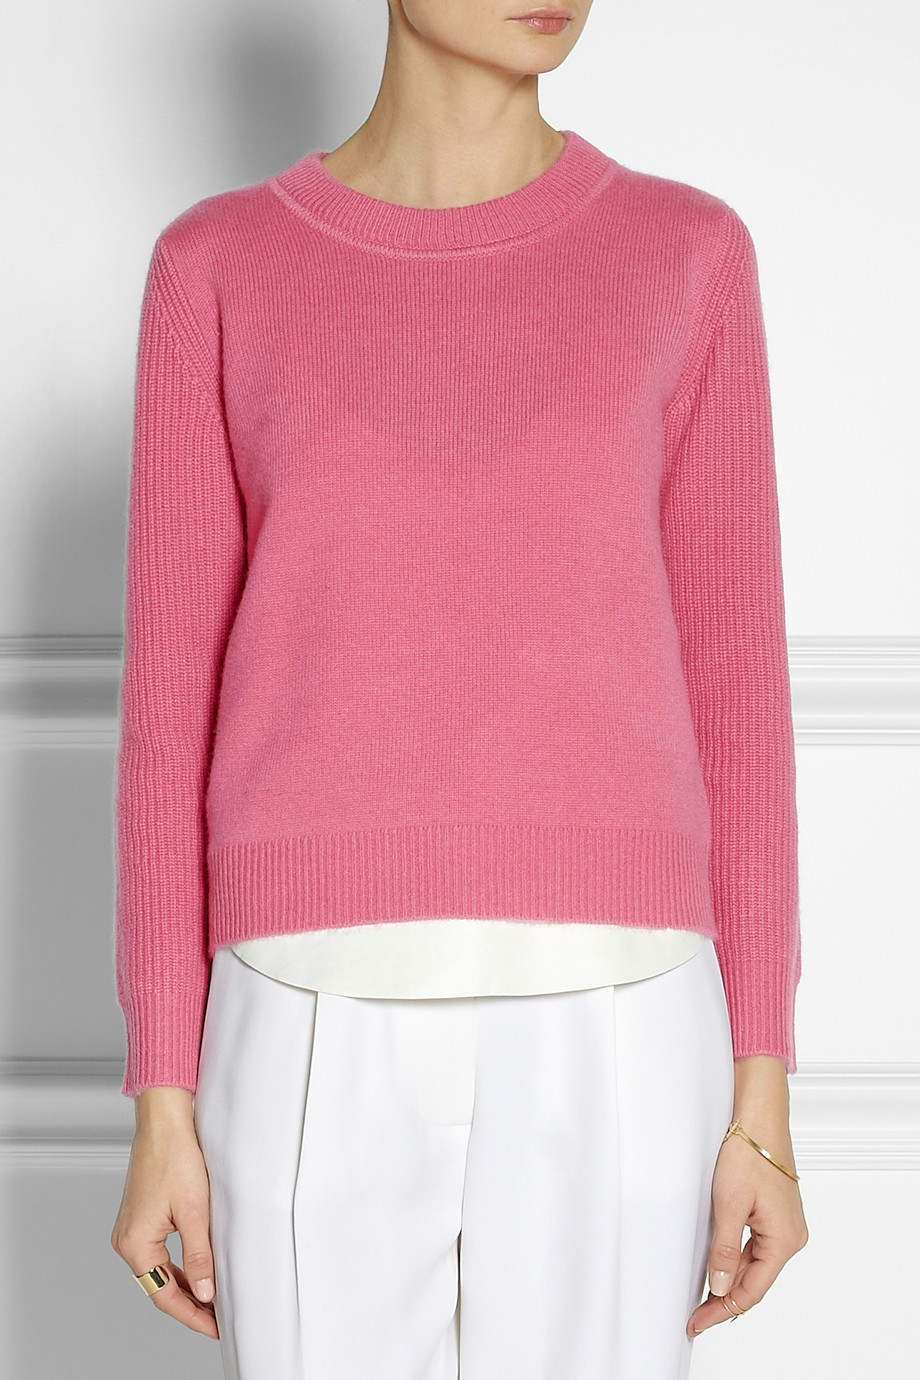 Chloé Cashmere Sweater in Pink | Lyst